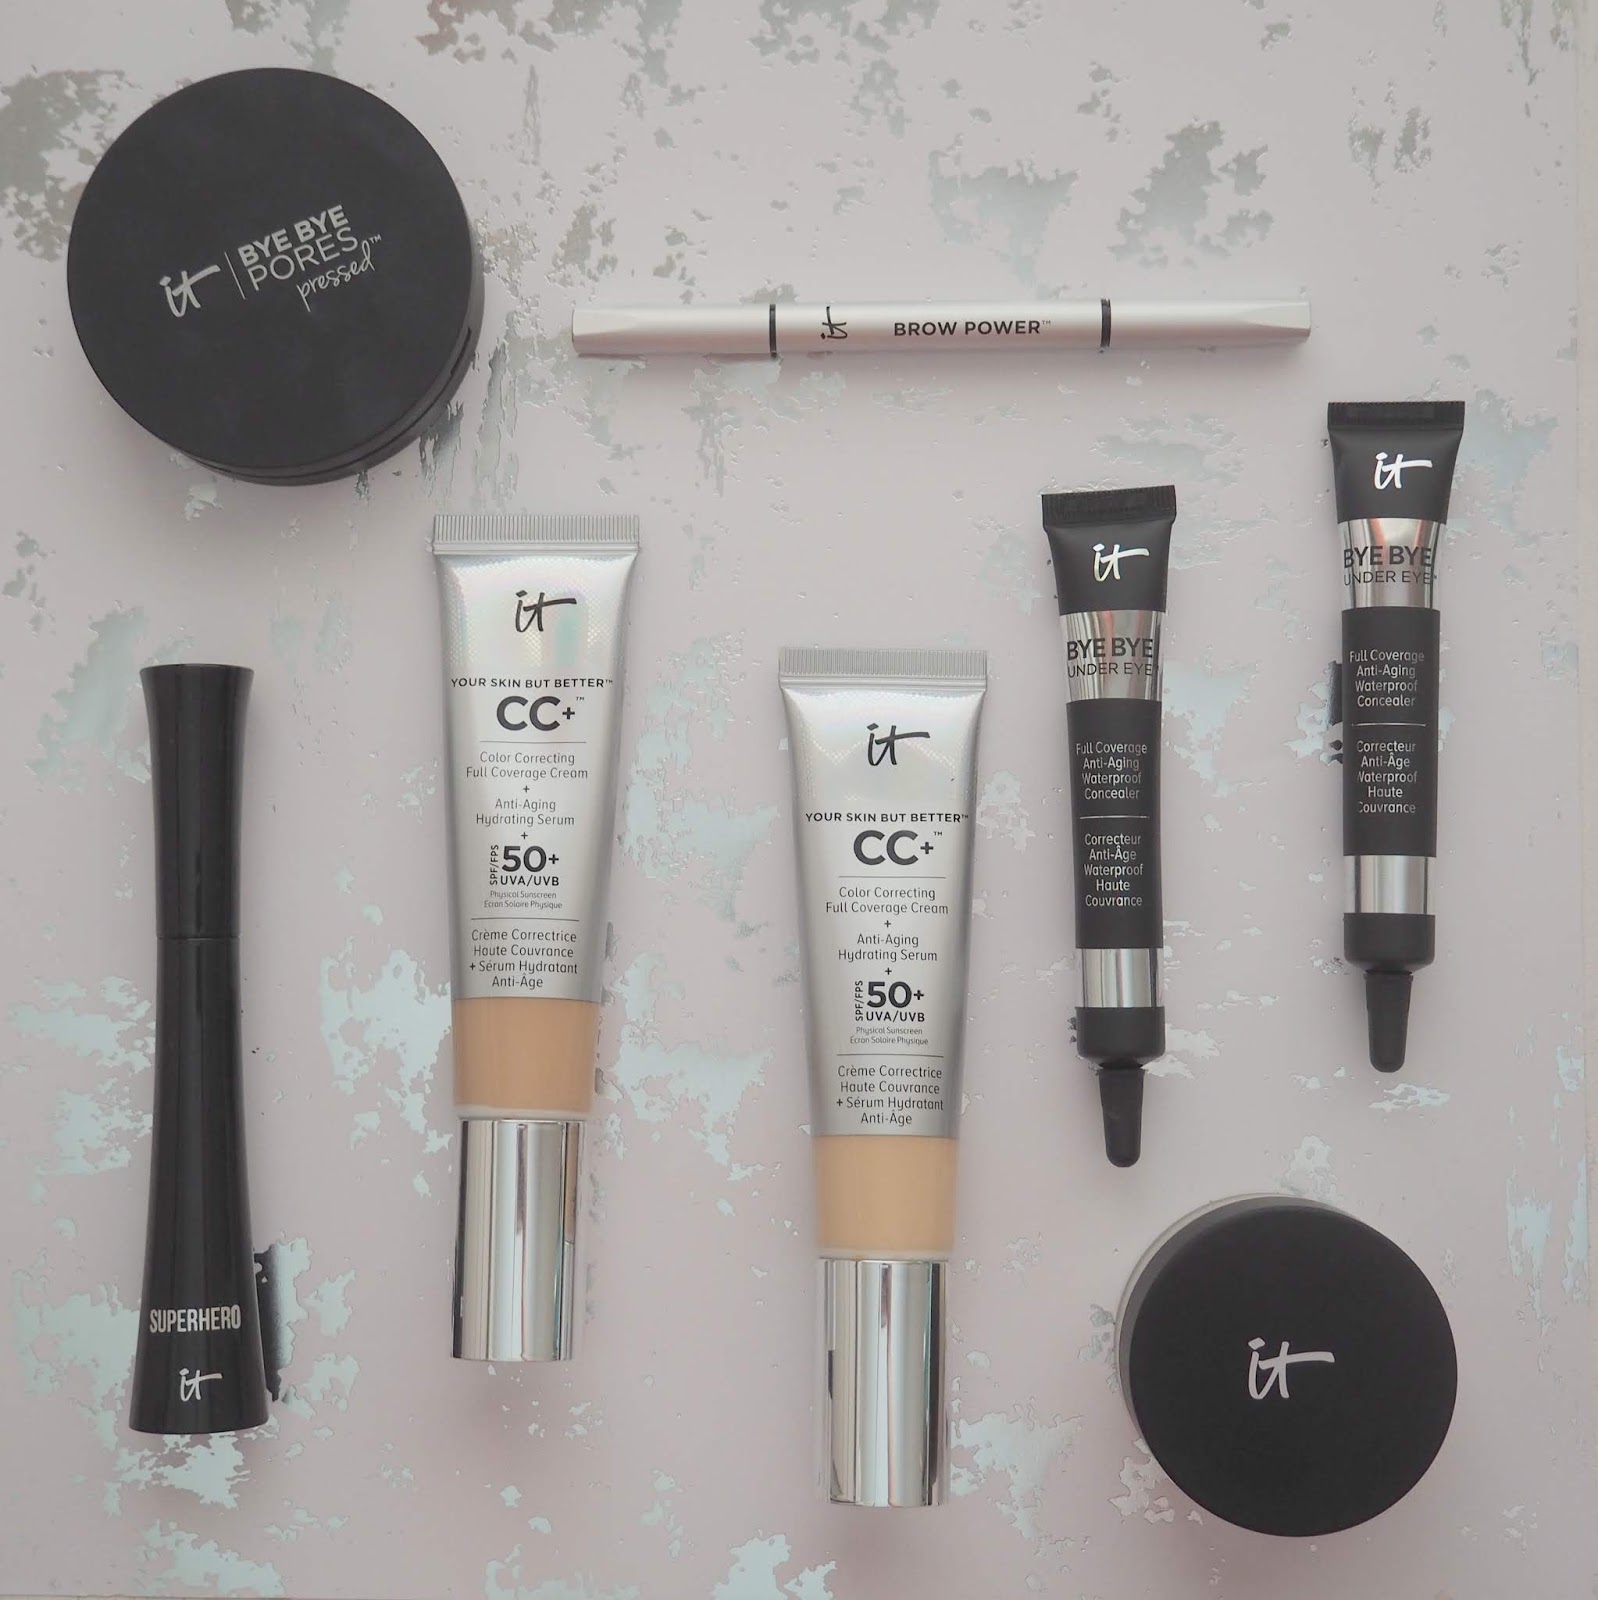 IT Cosmetics has come to Ireland & these are the bits you need to try!